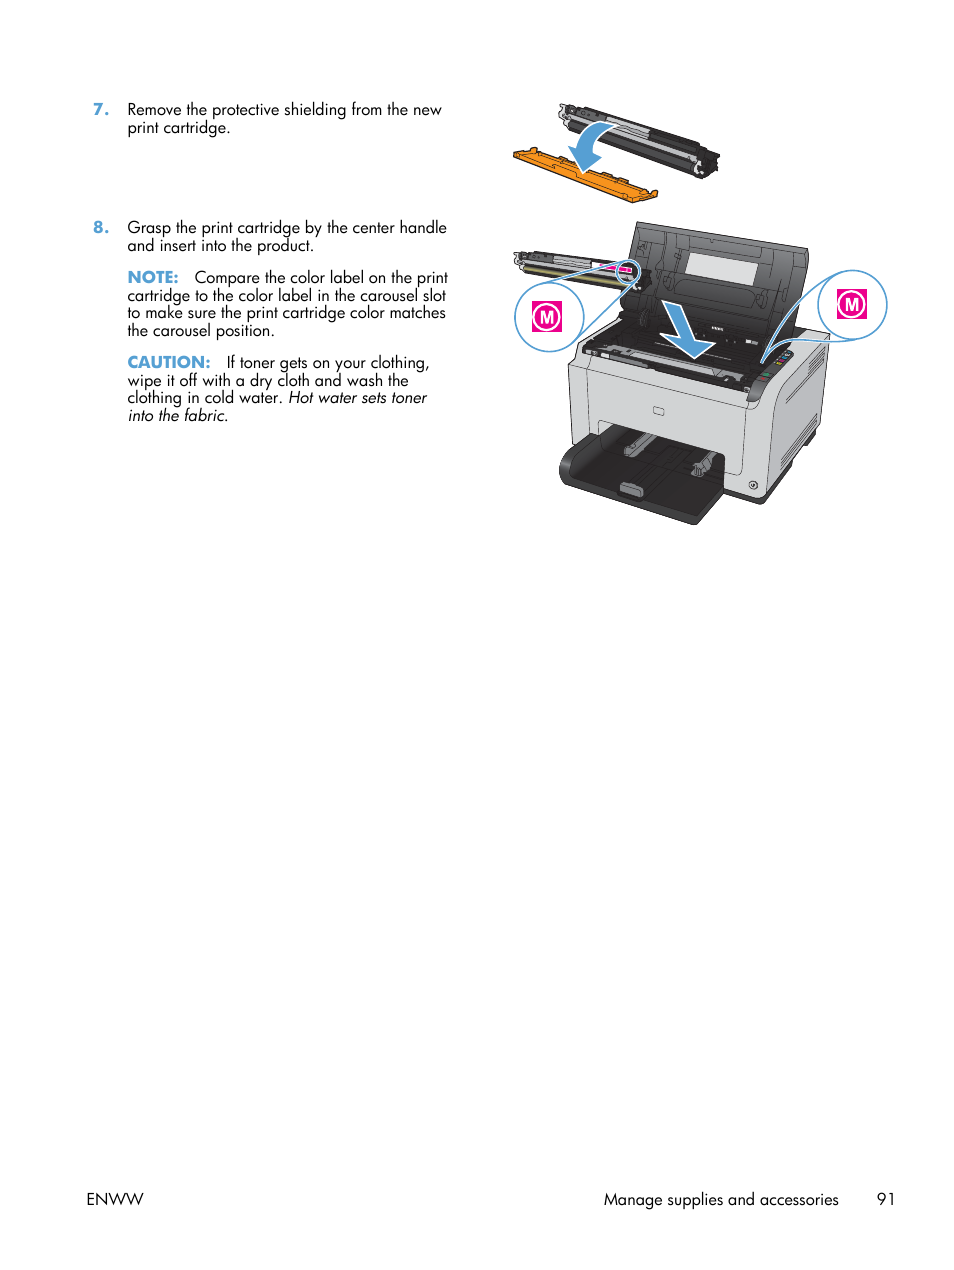 HP LaserJet Pro CP1025nw Color Printer User Manual | Page 103 / 186